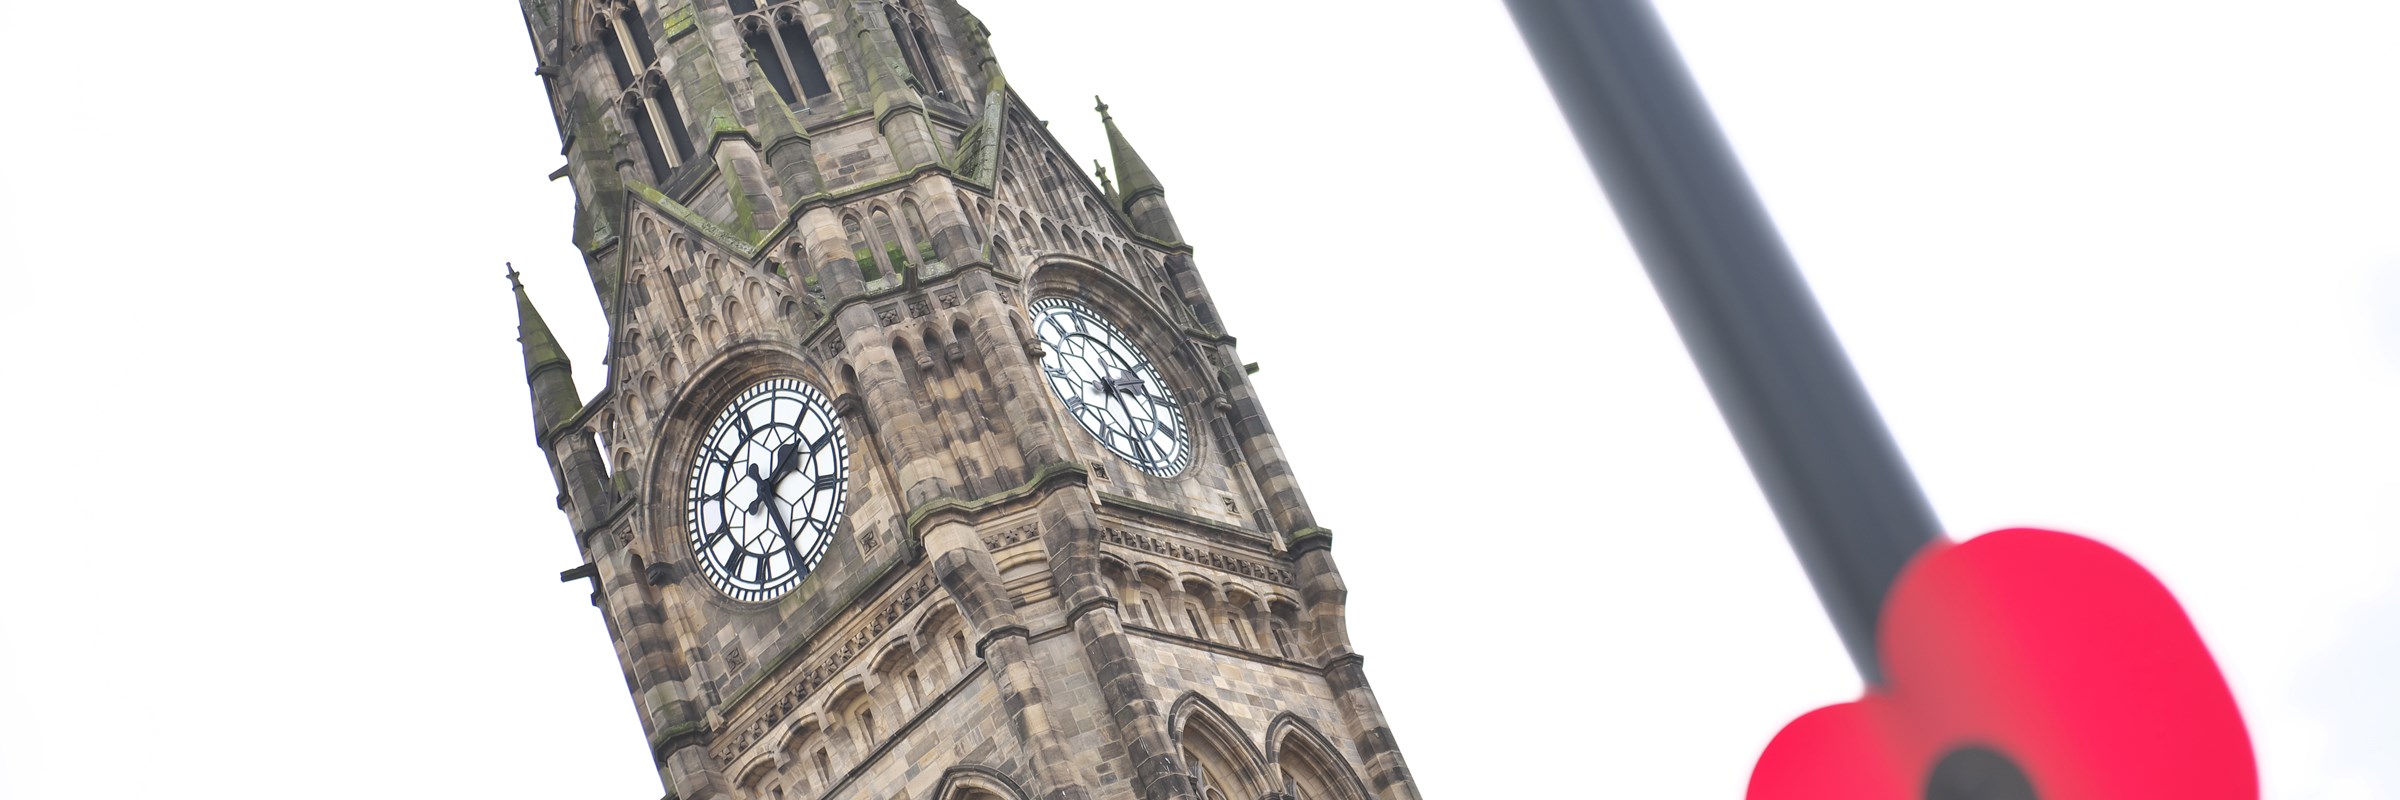 Rochdale Town Hall with a poppy